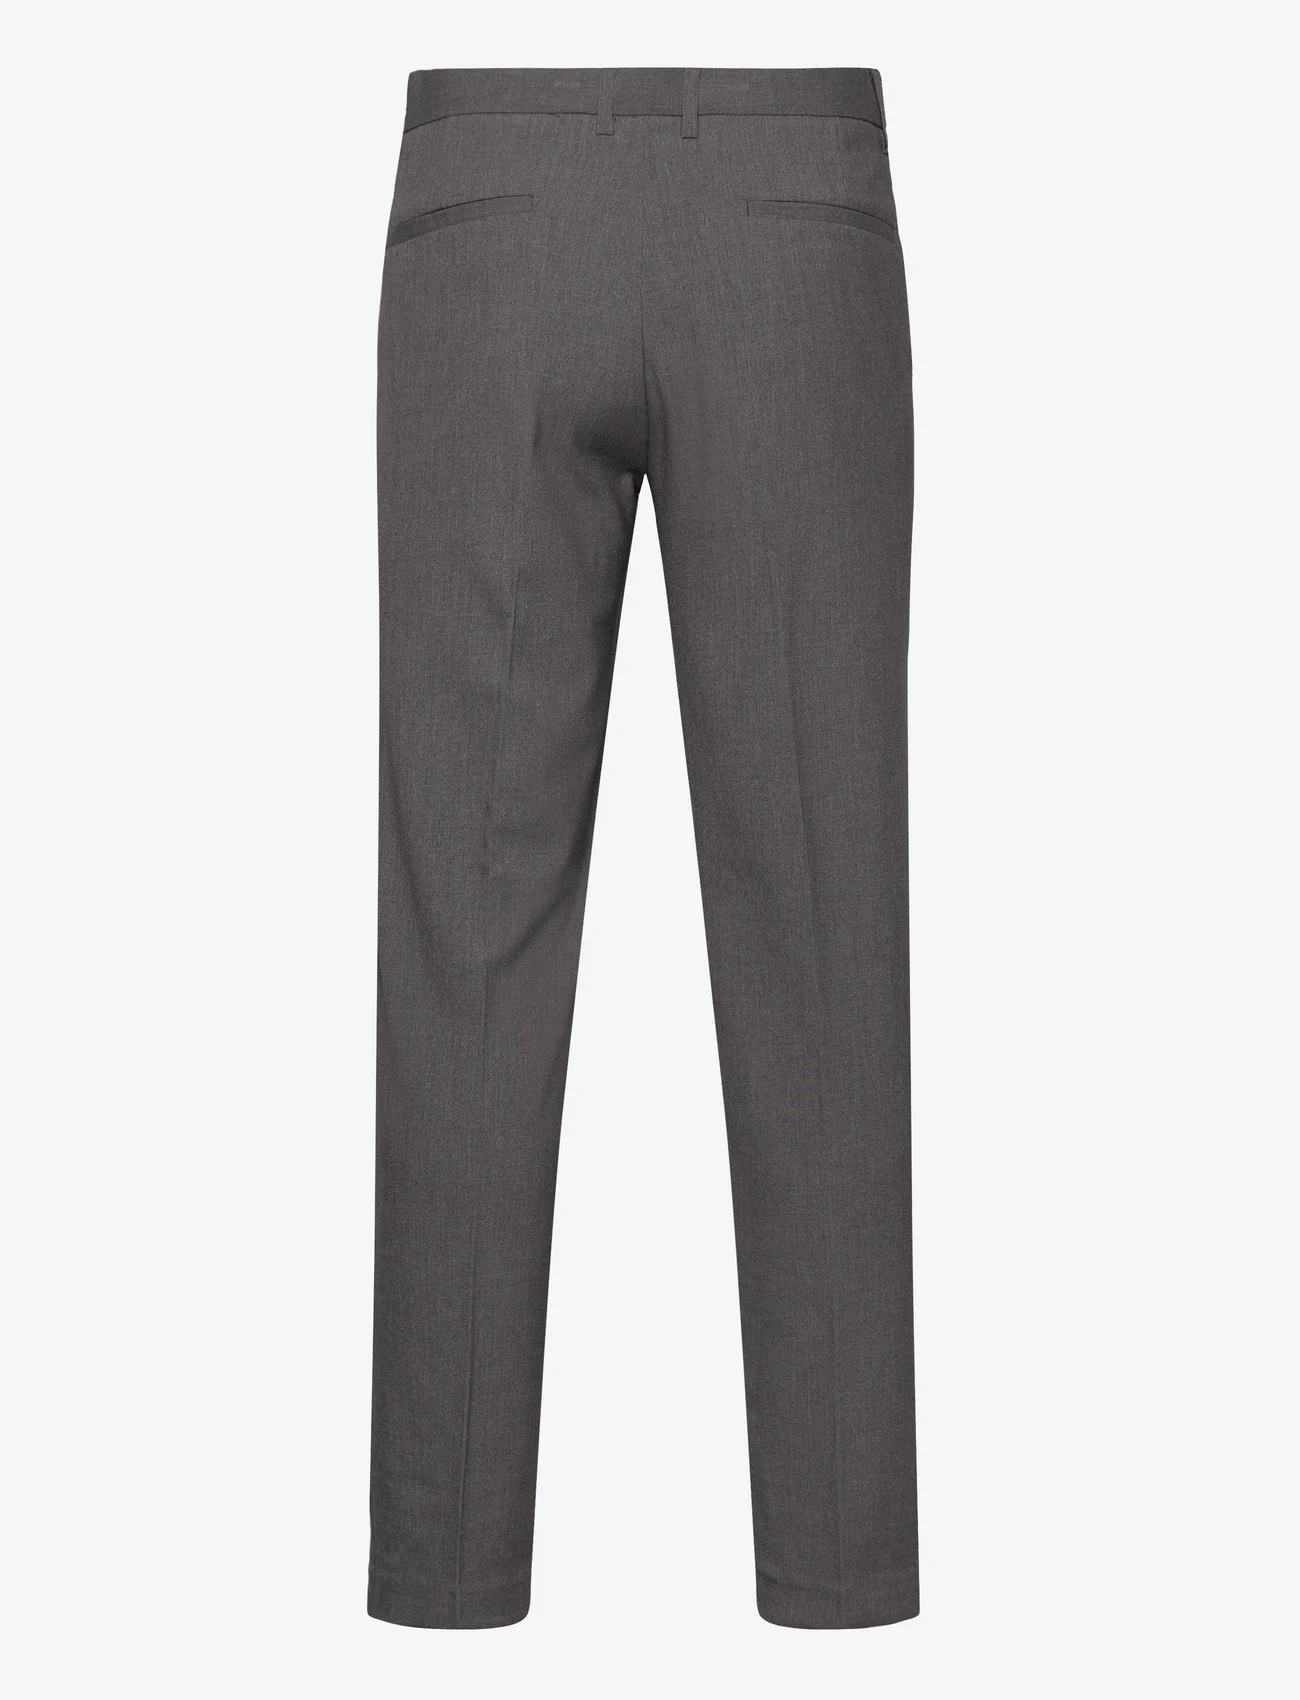 Lindbergh - Relaxed fit formal pants - anzugshosen - grey mix - 1